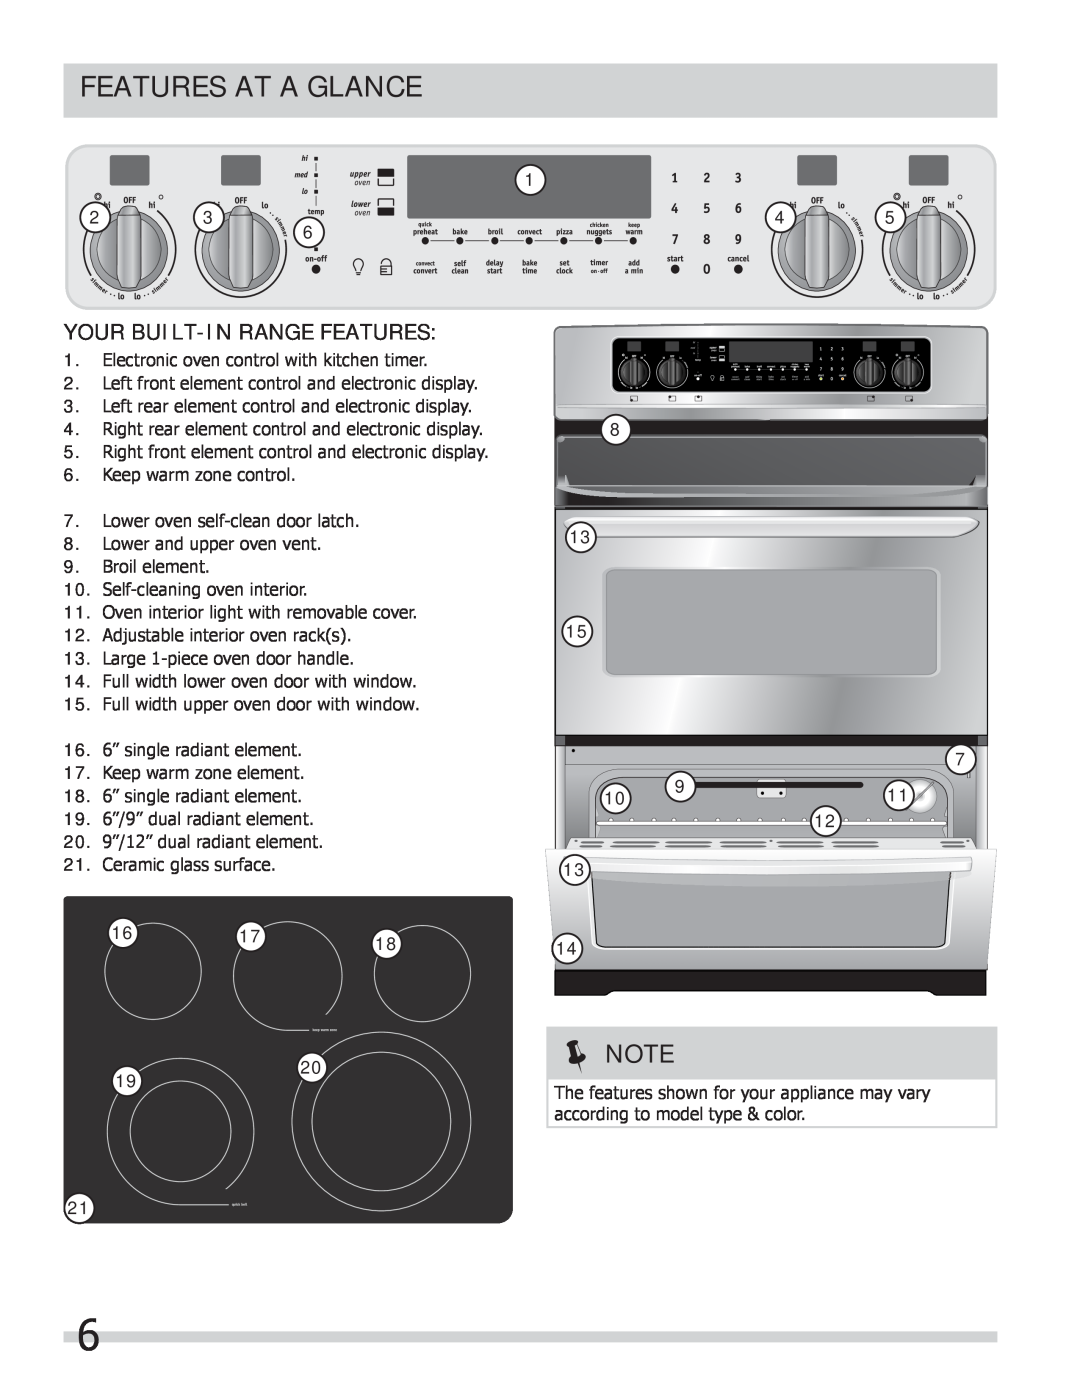 Frigidaire FGEF306TMF, FGEF306TMB, FGEF306TMW Features At A Glance, Your Built-In Range Features 